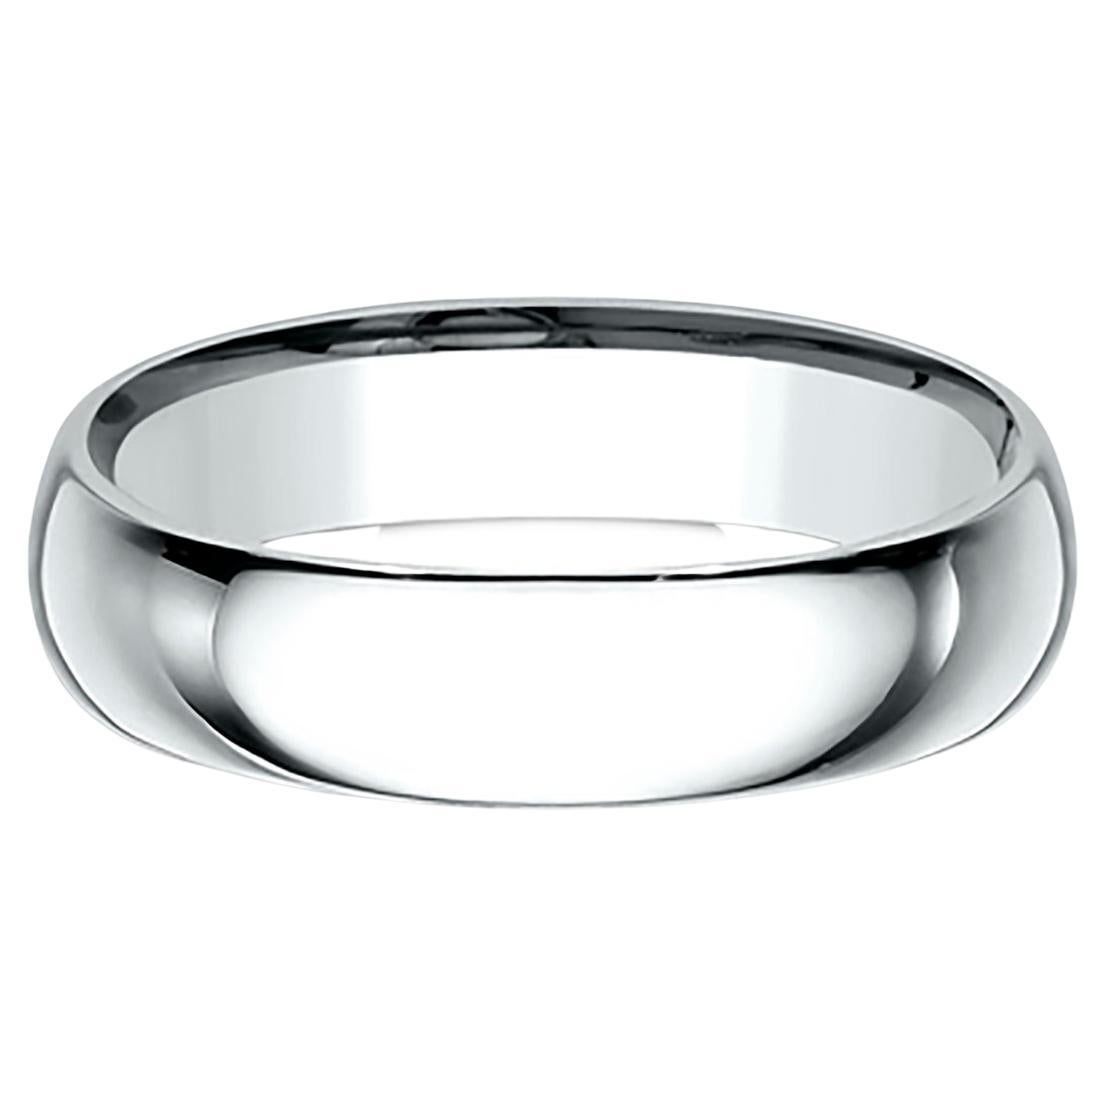 Benchmark Classic Comfort Fit Wedding Band in 14K White Gold, Width 5mm